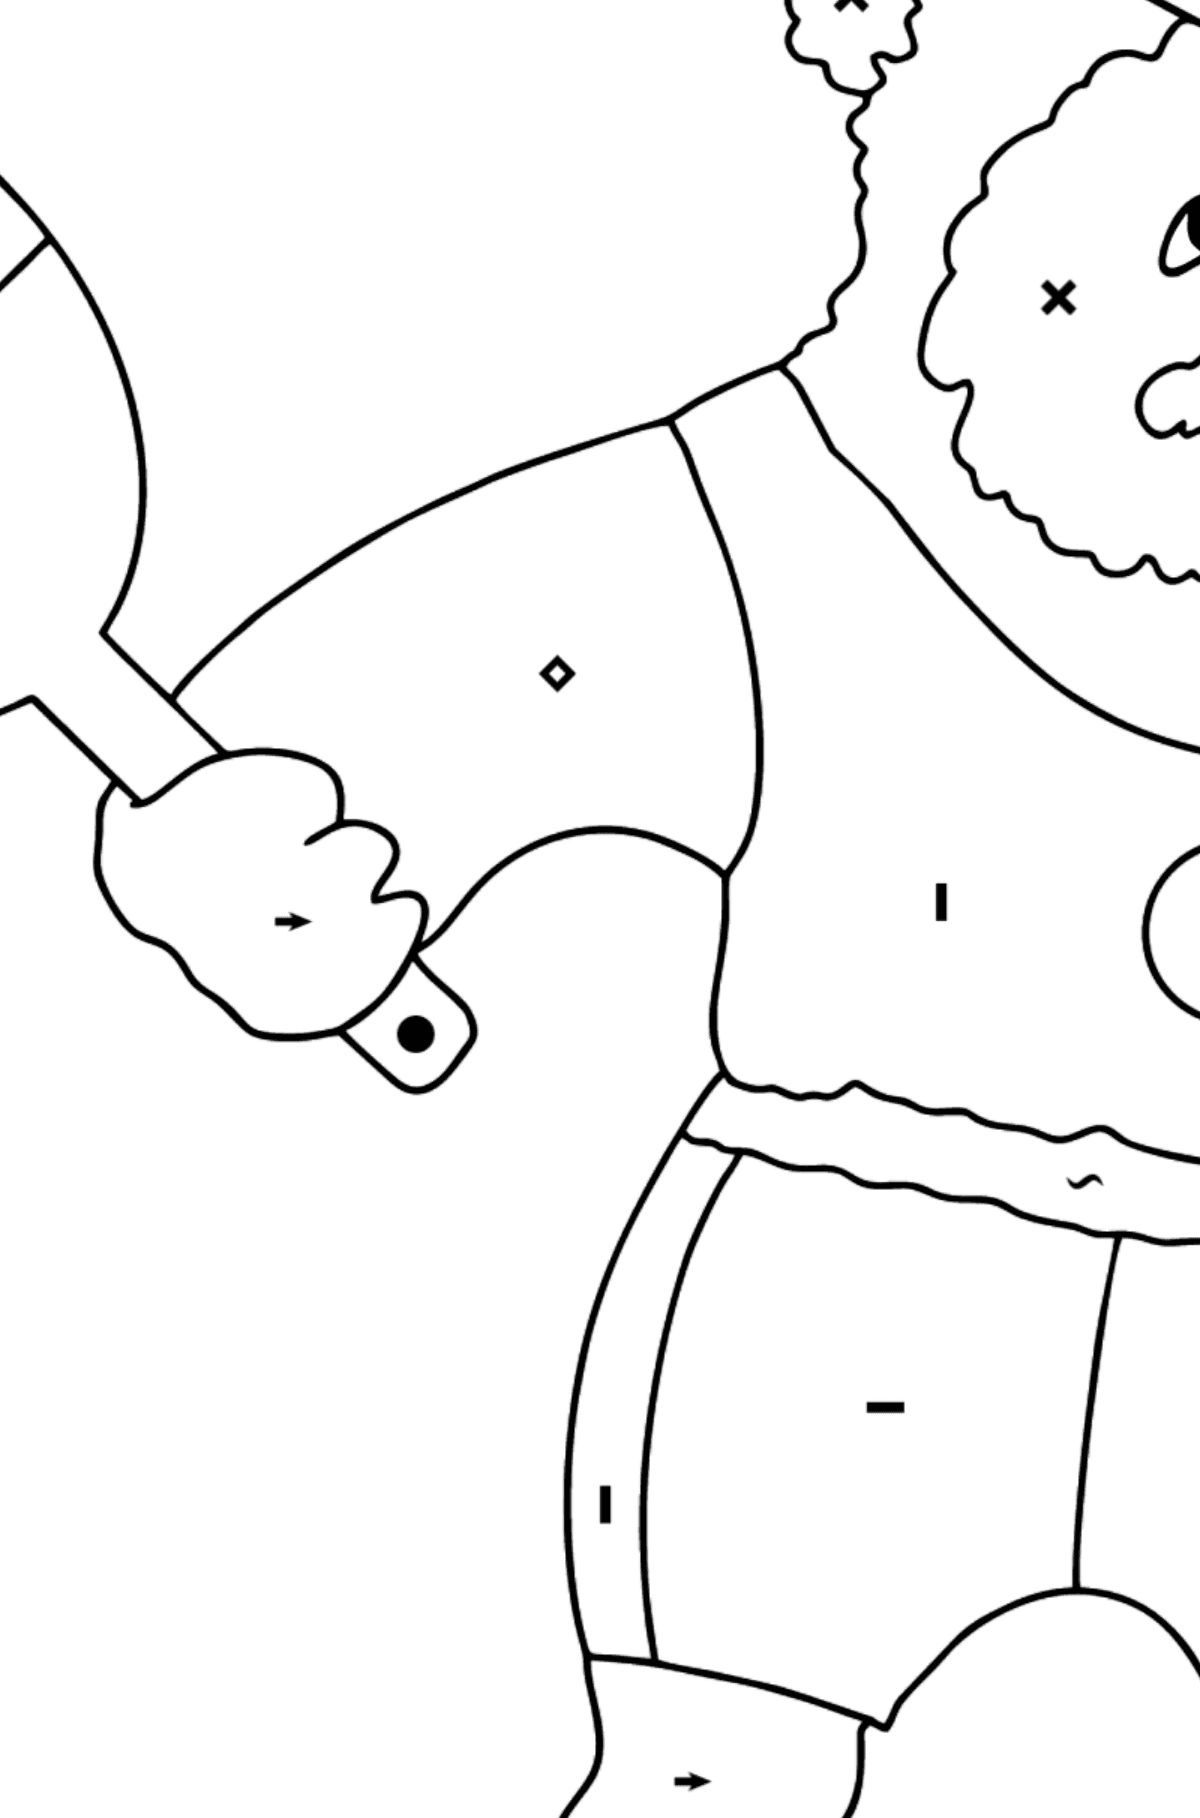 Charming Panda (Difficult) coloring page - Coloring by Symbols for Kids